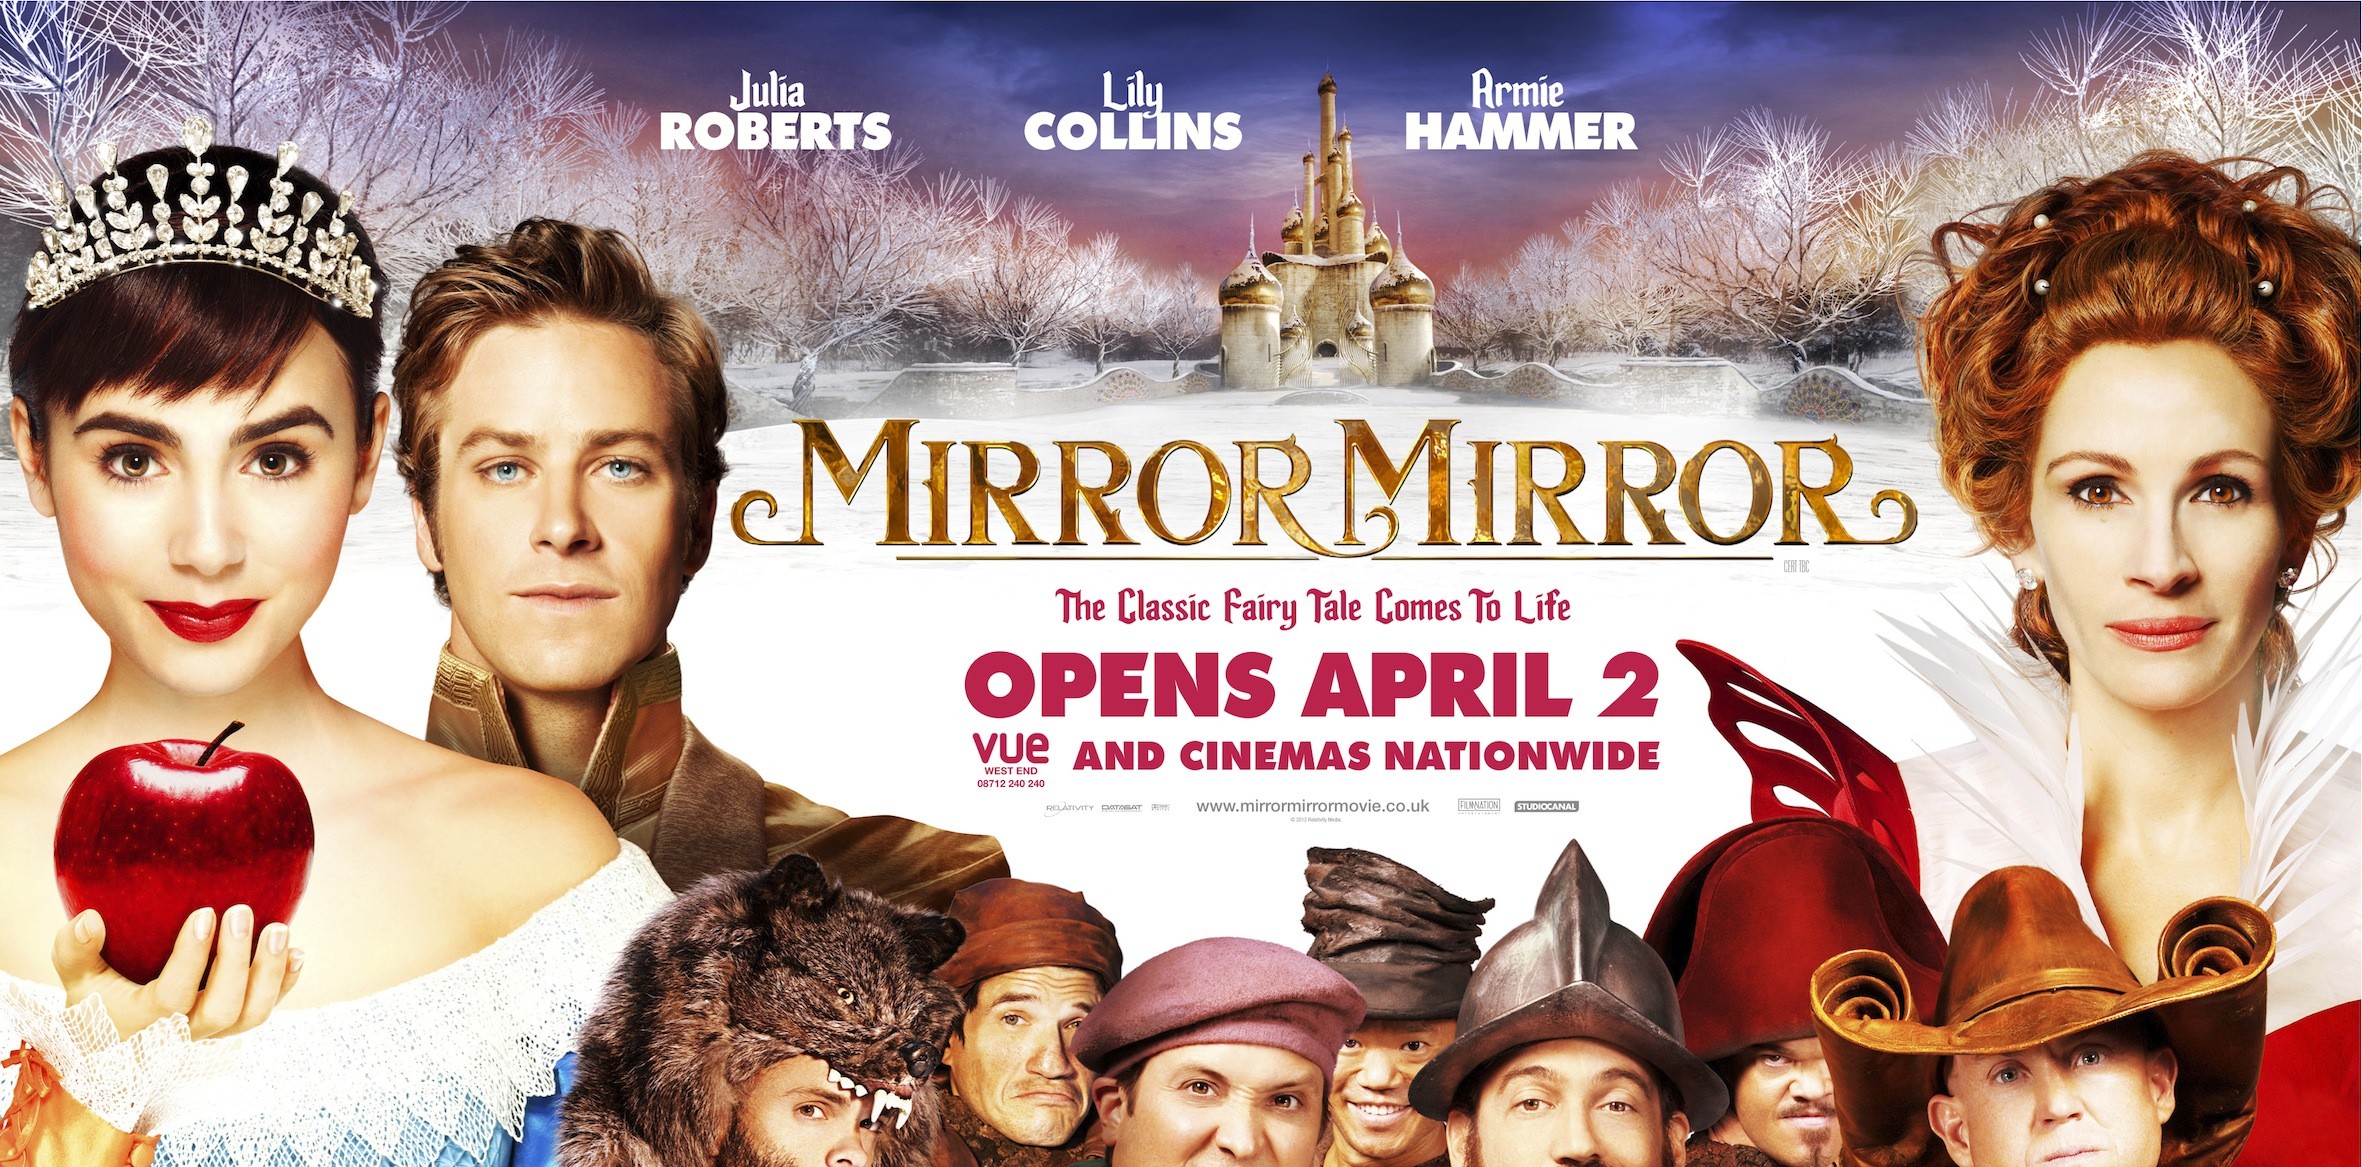 Mega Sized Movie Poster Image for Mirror, Mirror (#17 of 18)